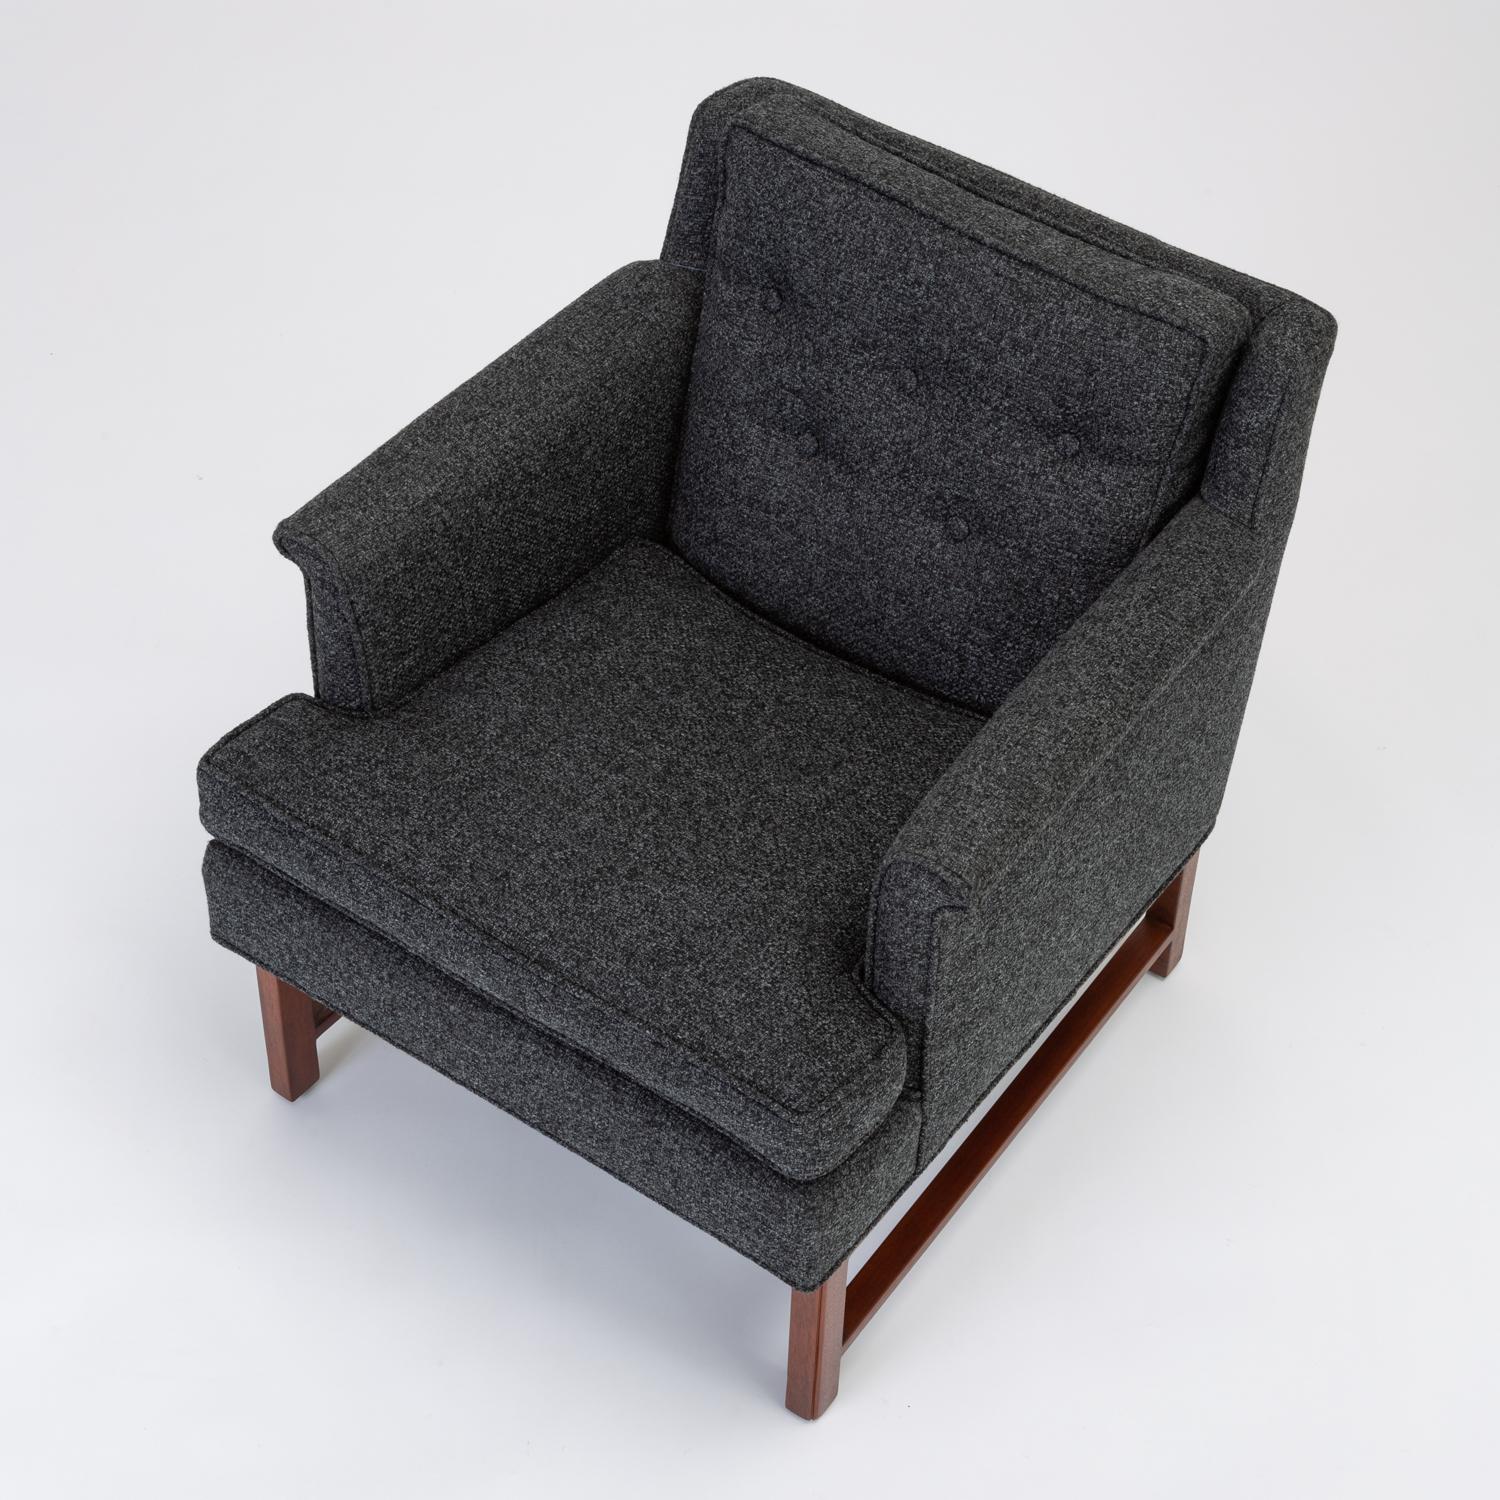 Upholstery Pair of Petite Lounge Chairs by Edward Wormley for Dunbar